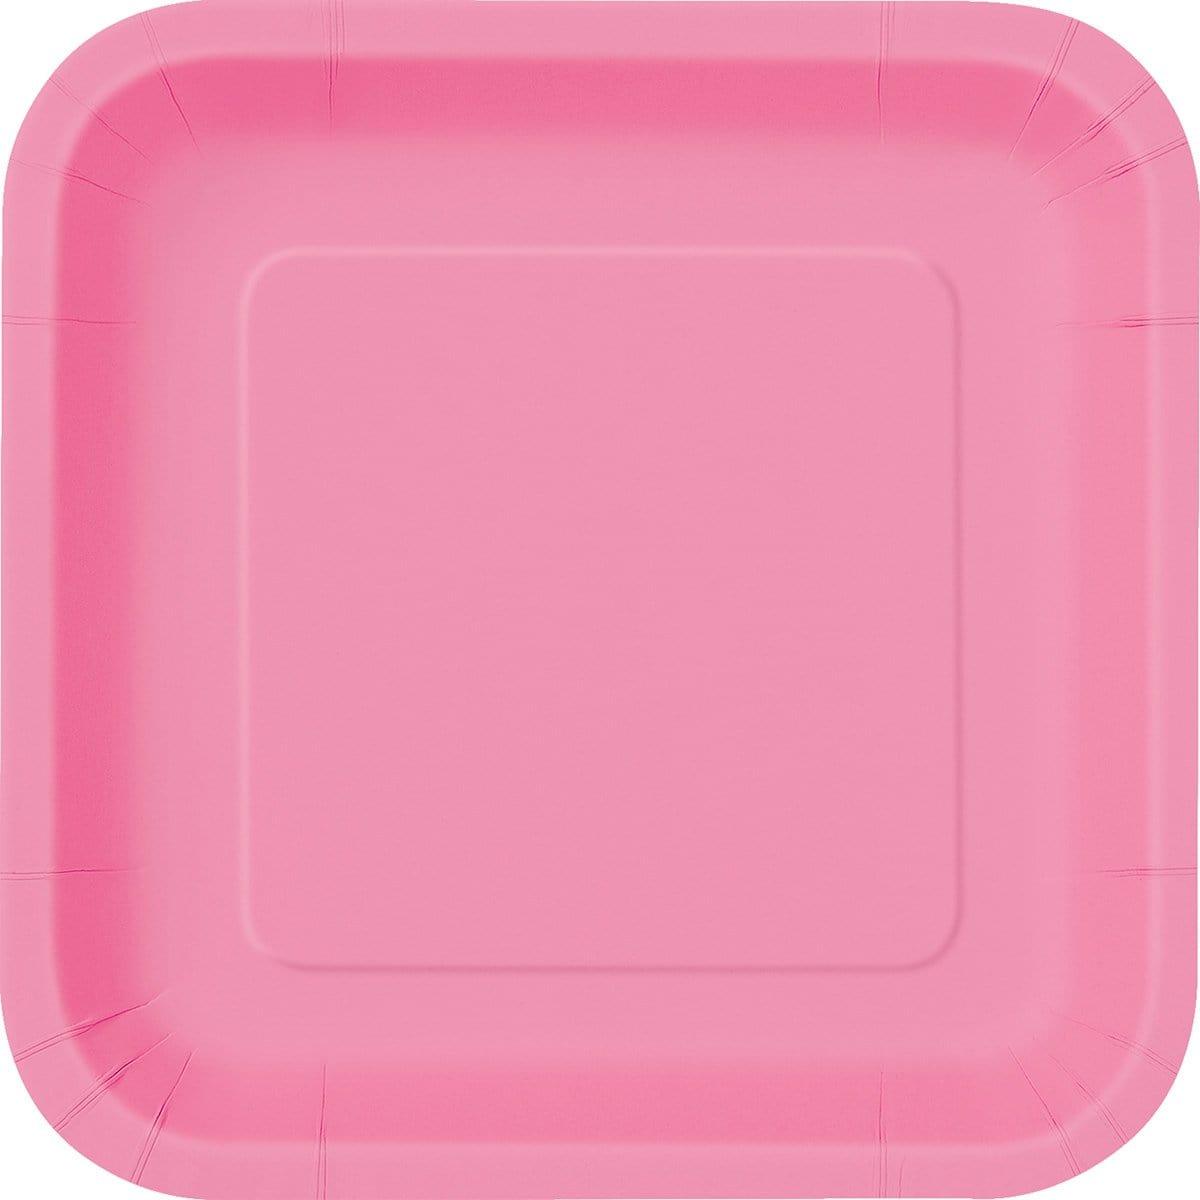 Buy Plasticware Square Paper Plates 9 In. - Hot Pink 14/pkg. sold at Party Expert